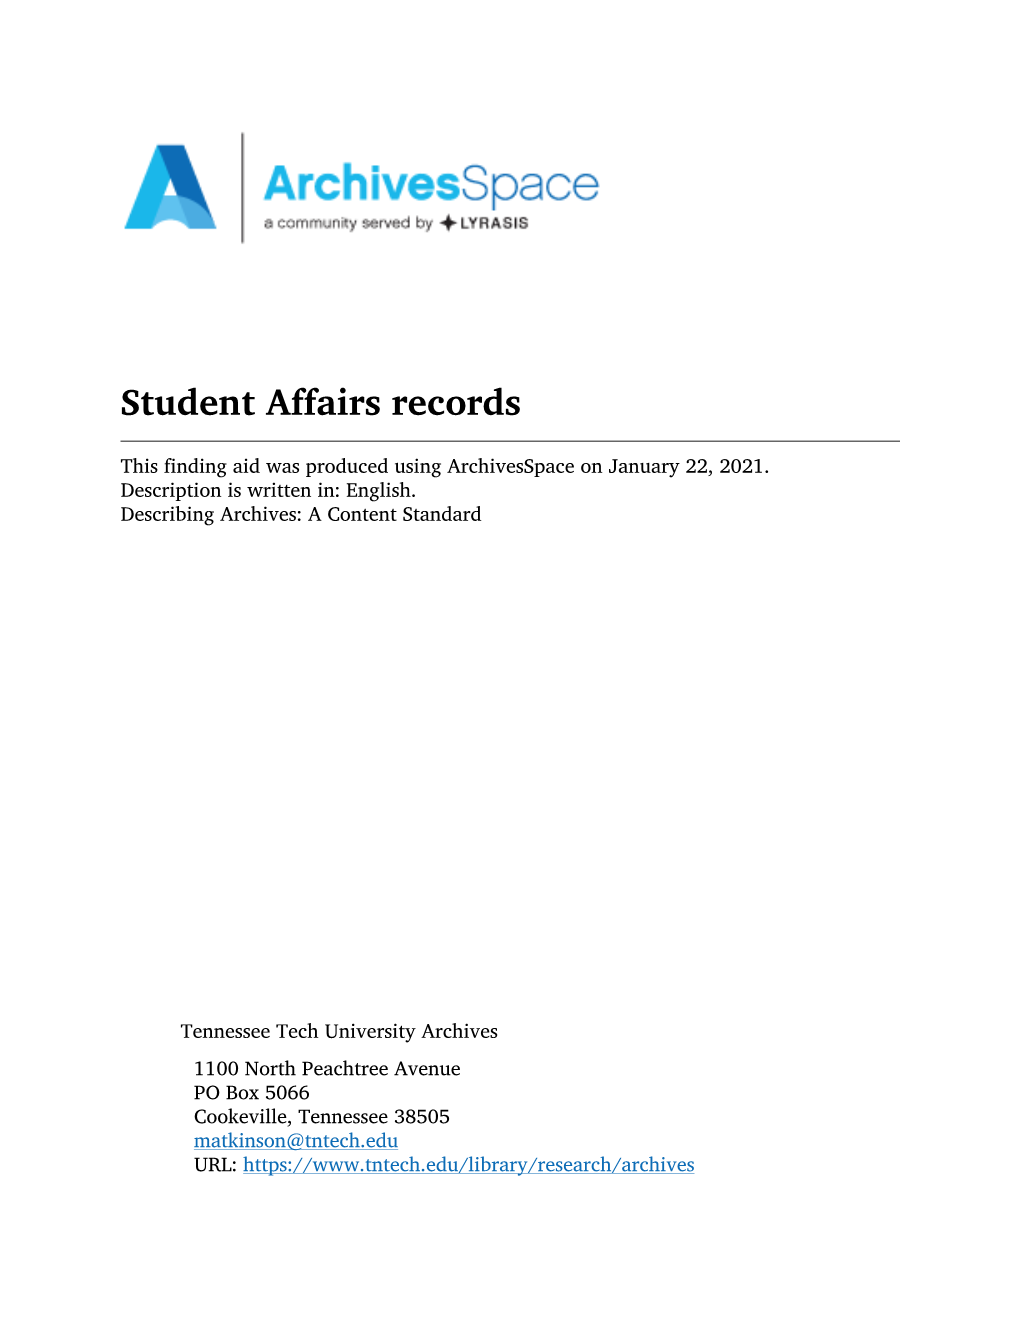 Student Affairs Records This Finding Aid Was Produced Using Archivesspace on January 22, 2021